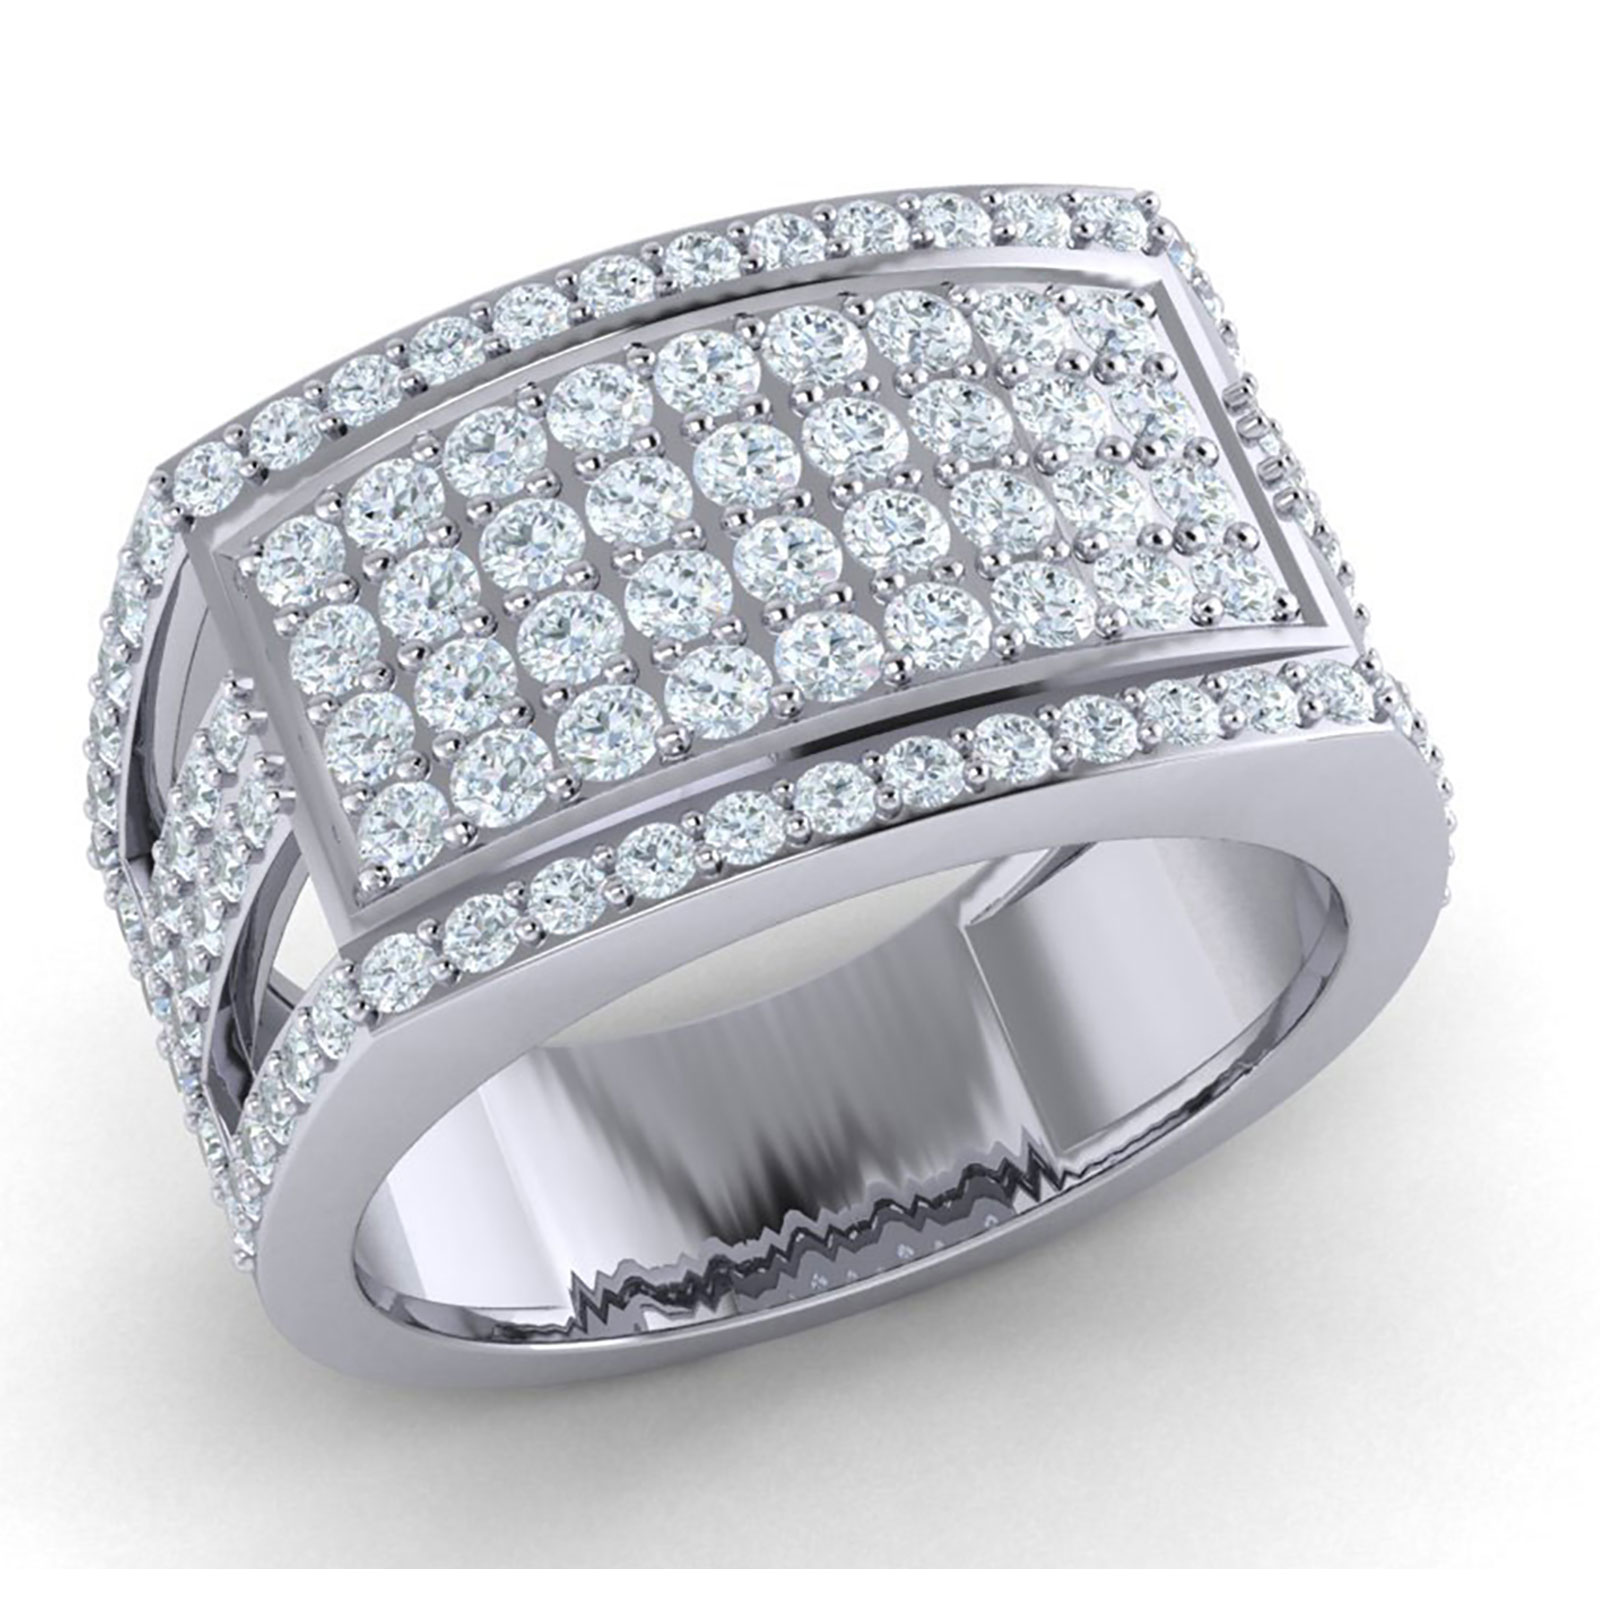 Jewel We Sell 2ctw Round Cut Diamond Cluster Wide Fancy Men's Wedding Band Anniversary Ring 10K White Gold GH SI1